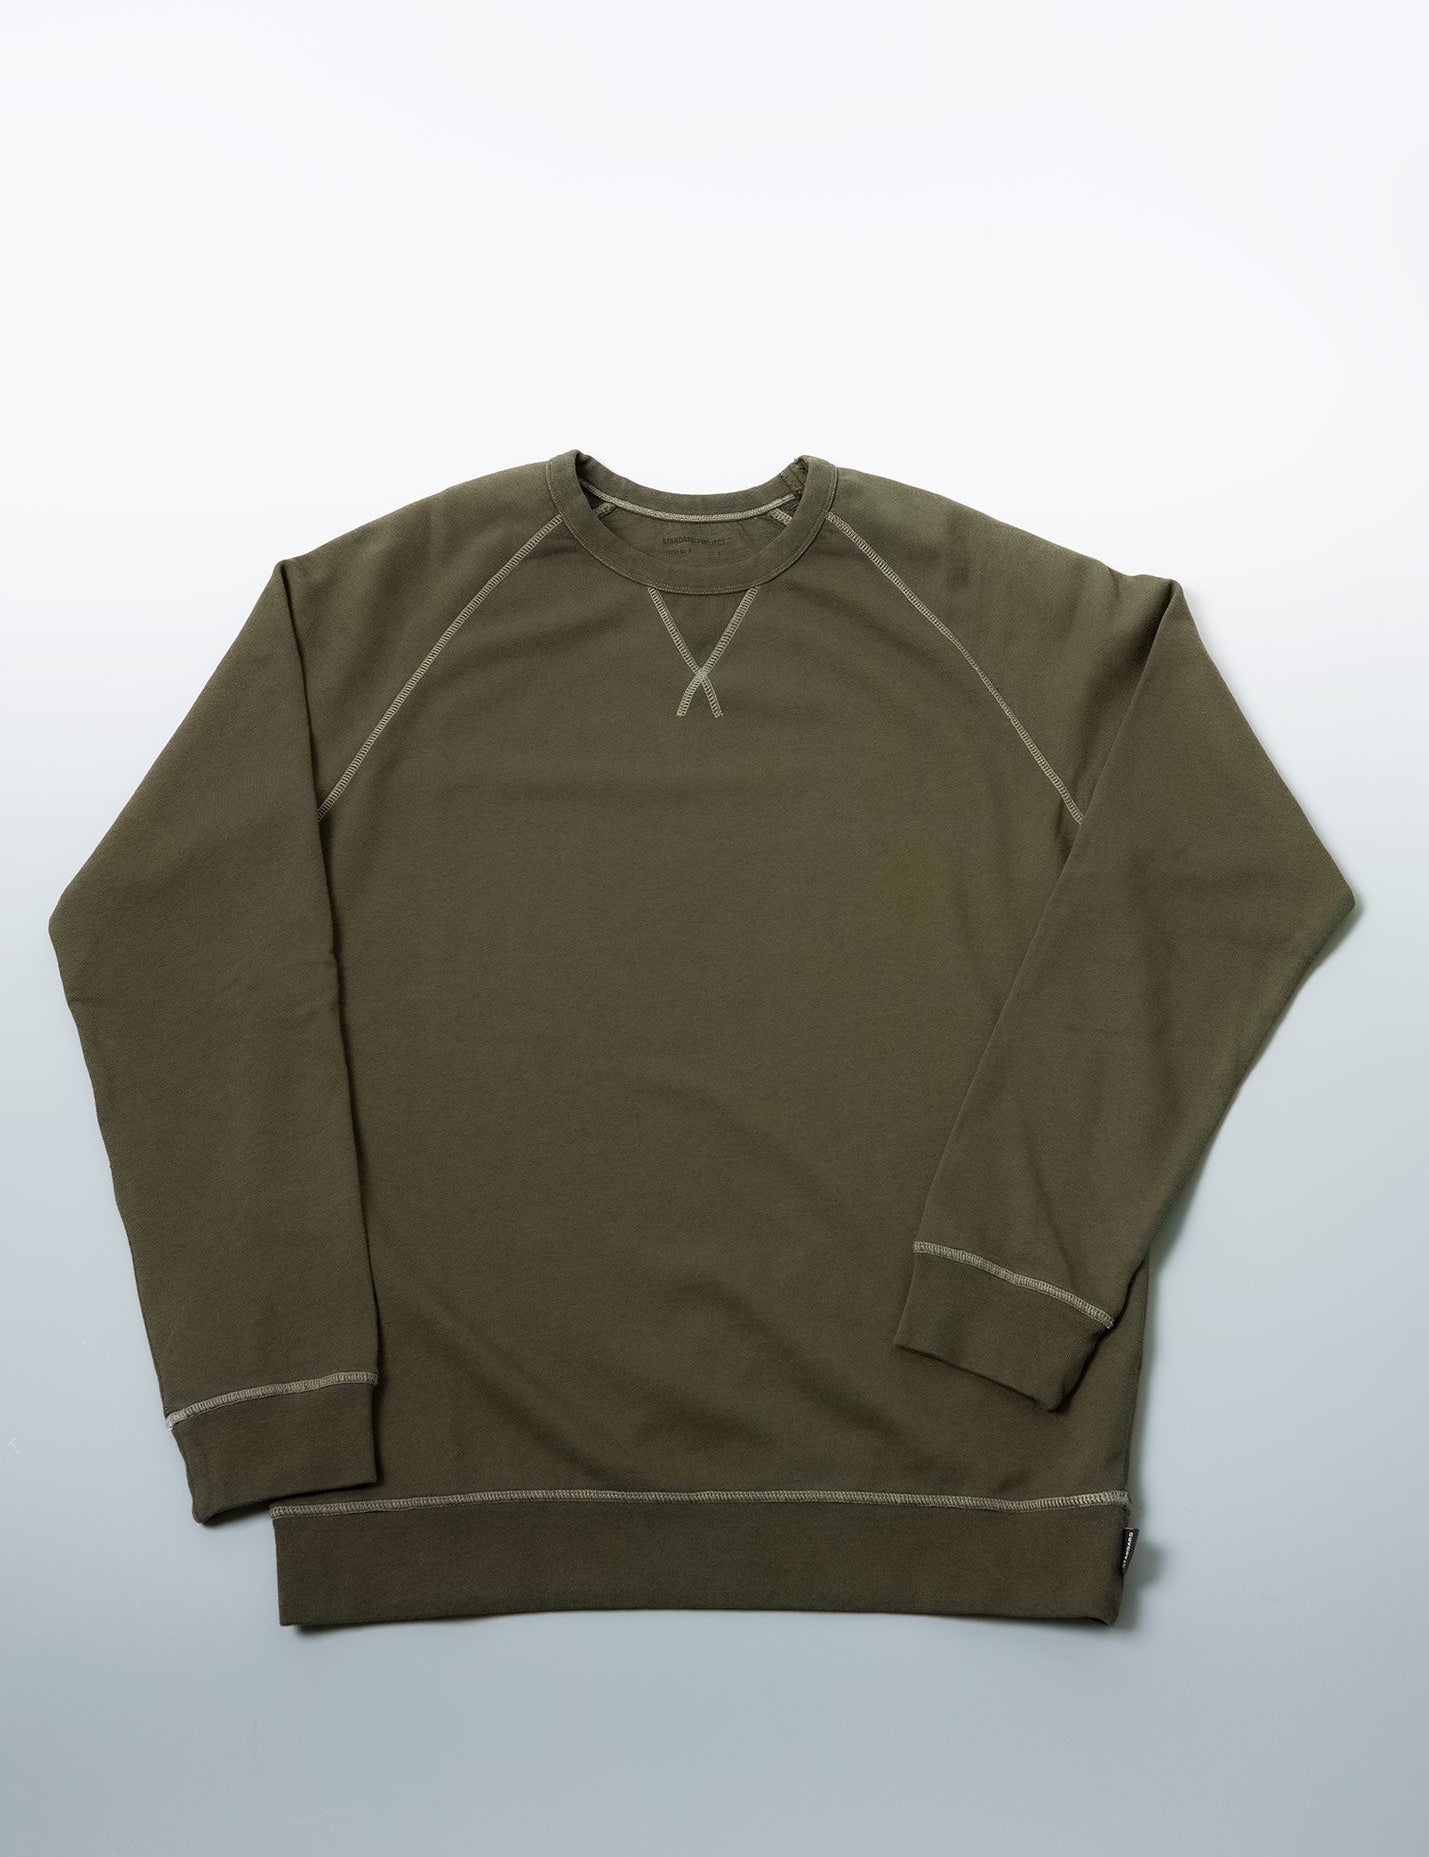 ITEM No. 03 – Sweater Olive Overdyed - Standard Project